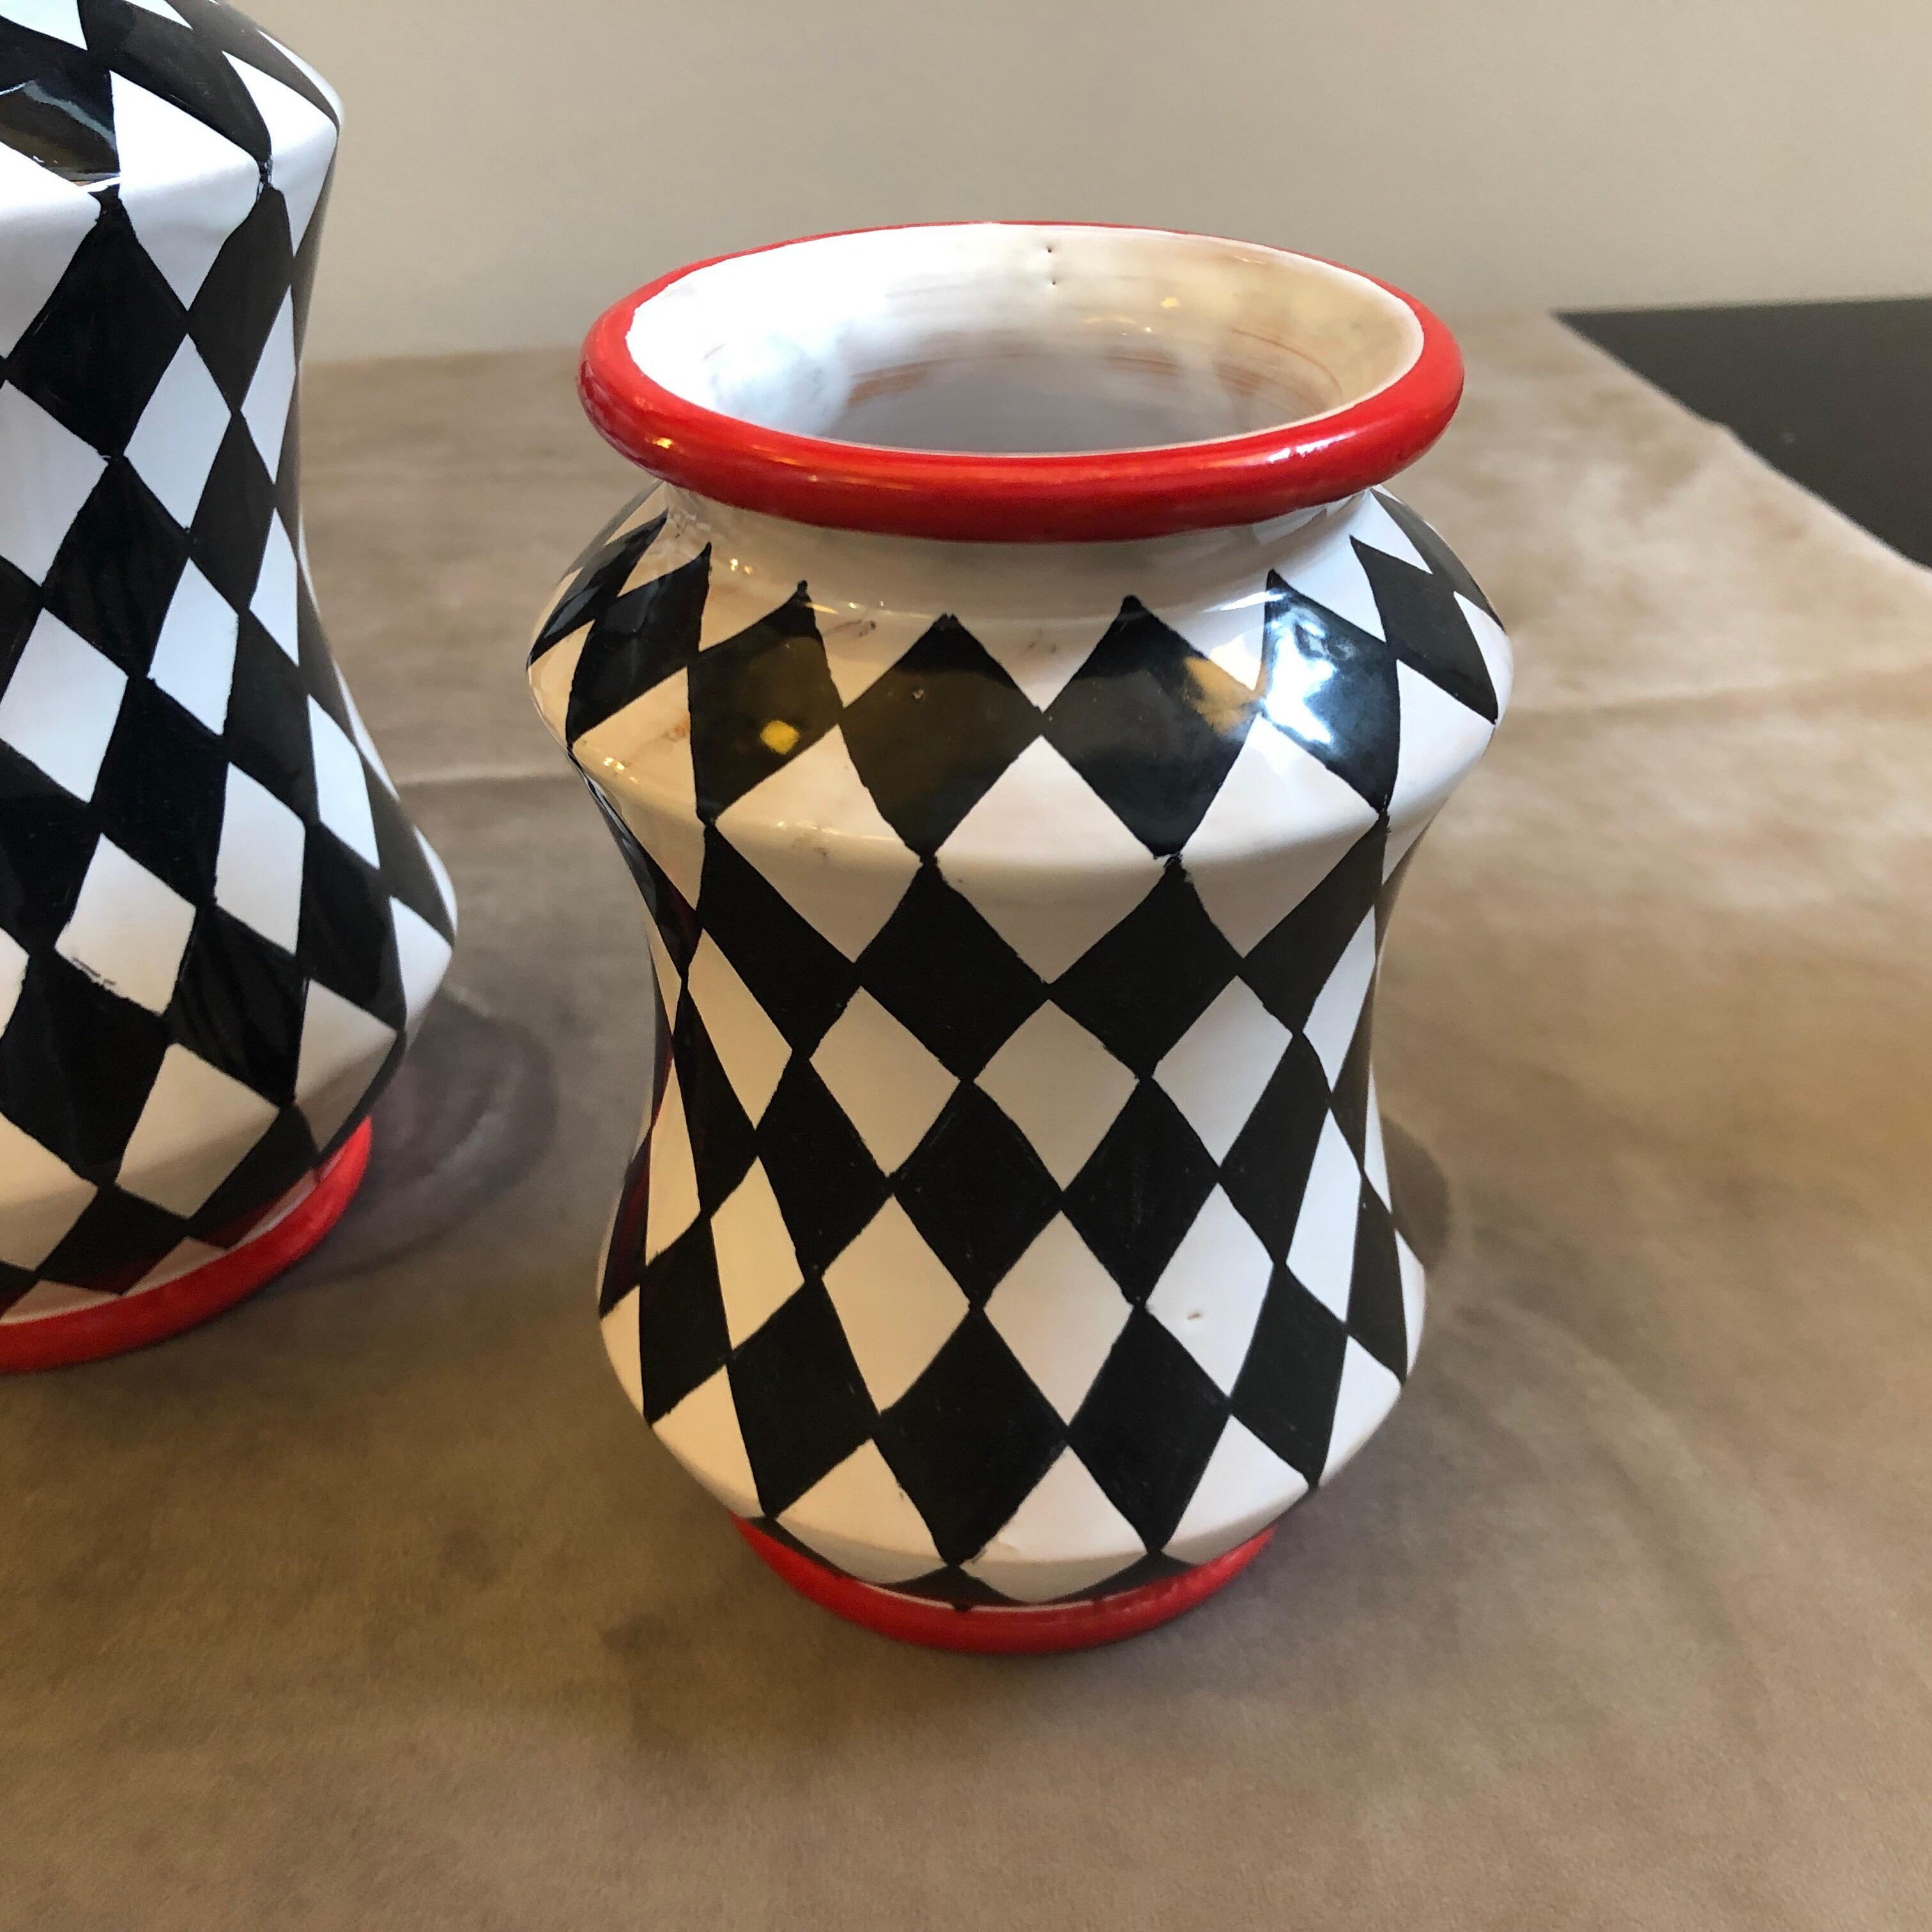 Three hand painted terracotta vases made in Sicily, they are unique pieces especially made for our shop and signed on the bottom. In the past, the Albarello vase was made to contain medical herbs
Dimensions: Medium vase height 21 cm, small vase